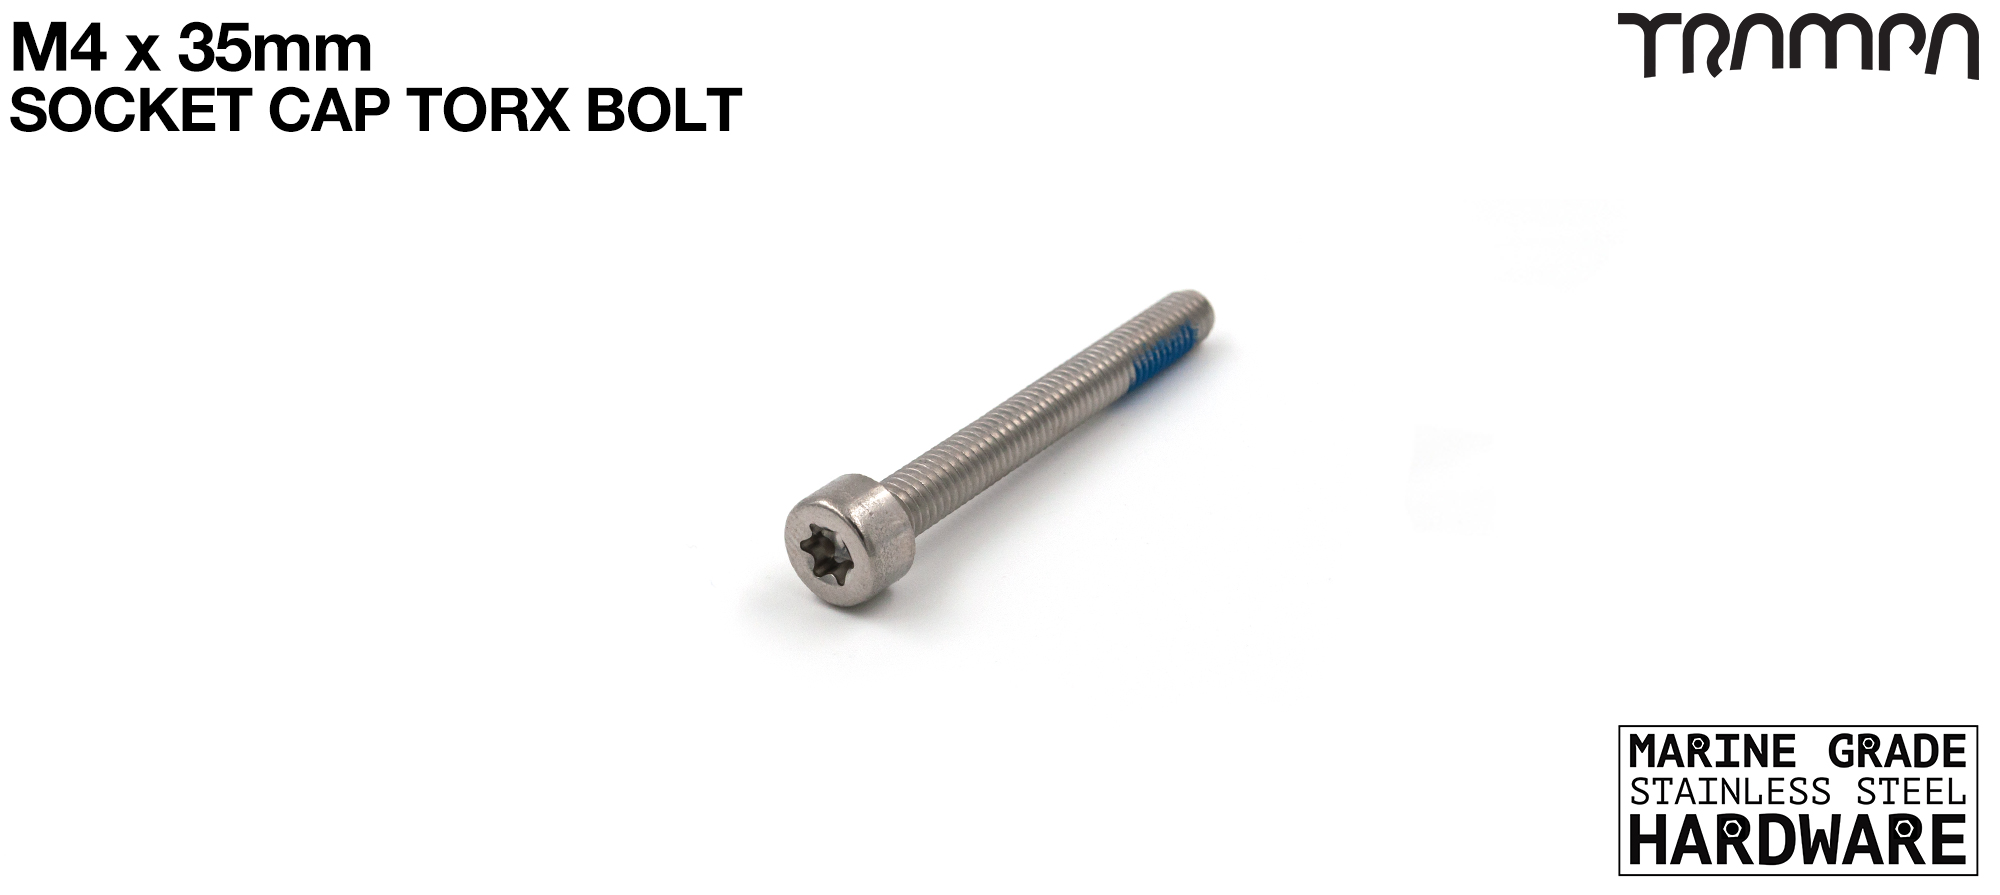 M4 x 35mm Socket Capped TORX Bolt - Marine Grade Stainless steel with locking paste 